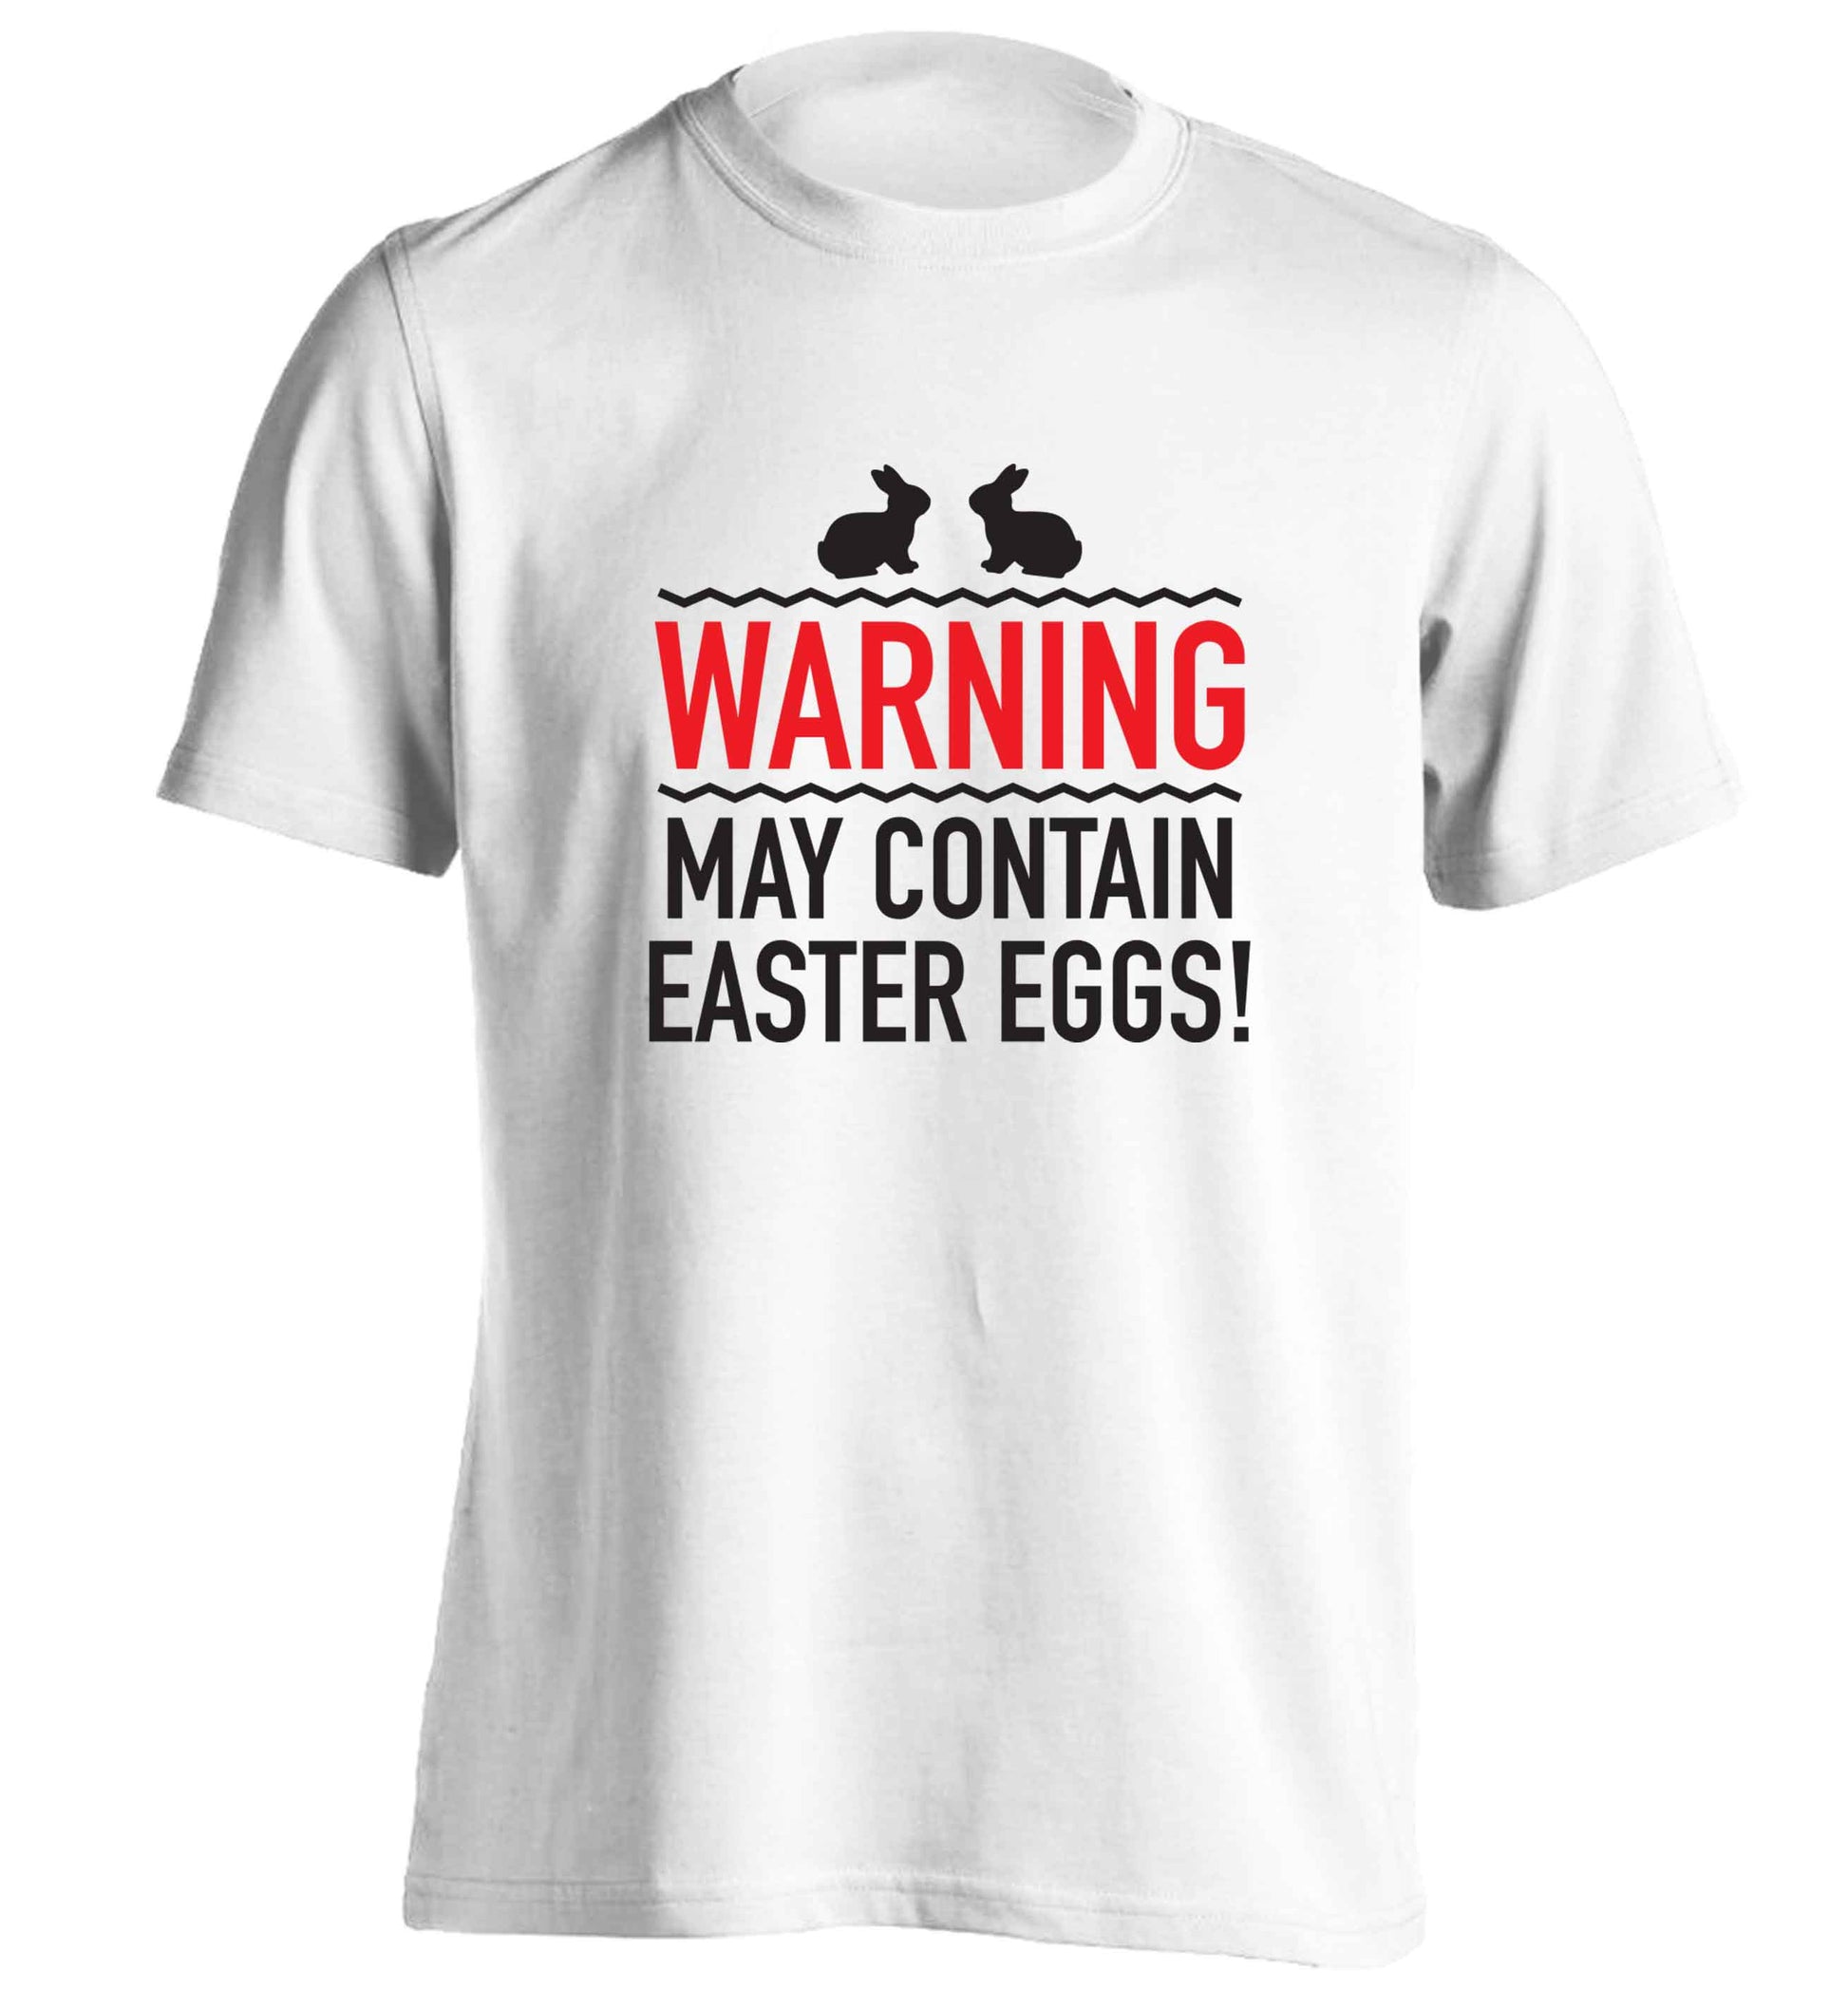 Warning may contain Easter eggs adults unisex white Tshirt 2XL